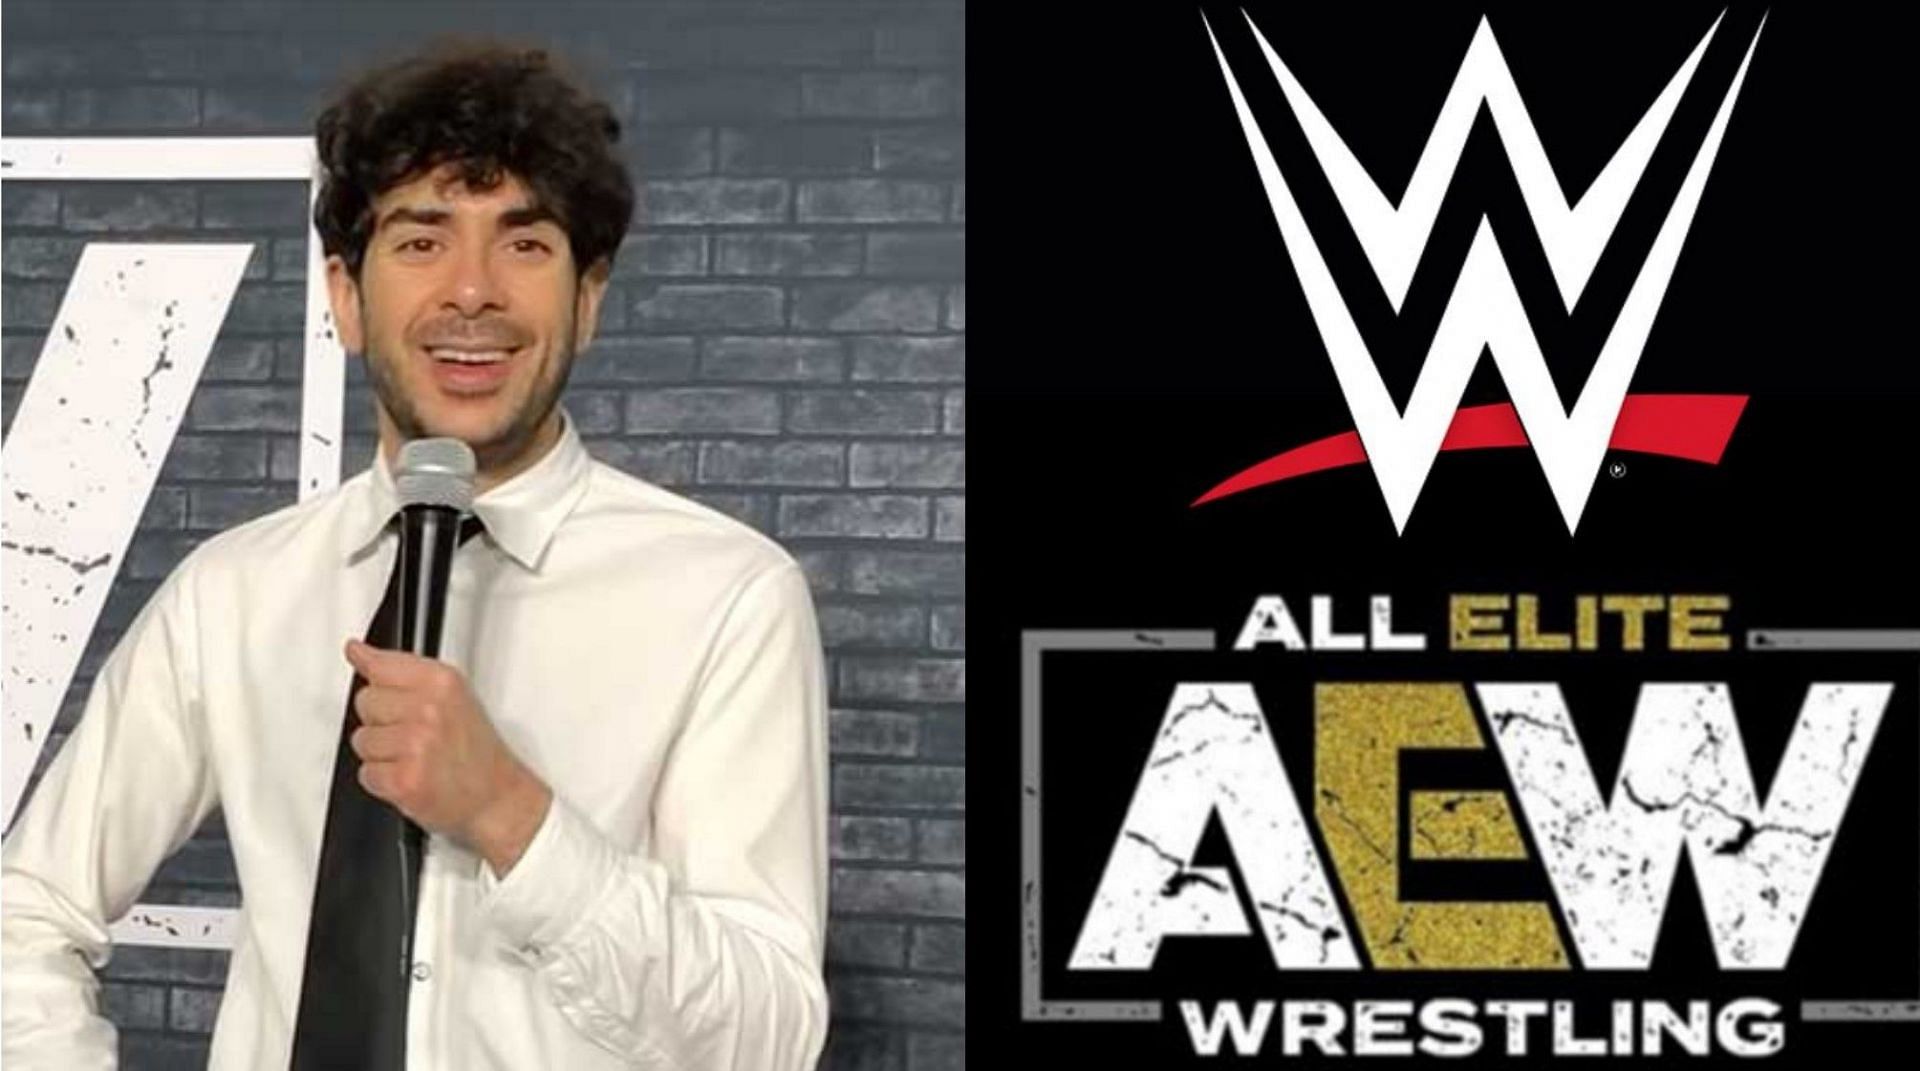 Tony Khan appears to have signed yet another wrestler!